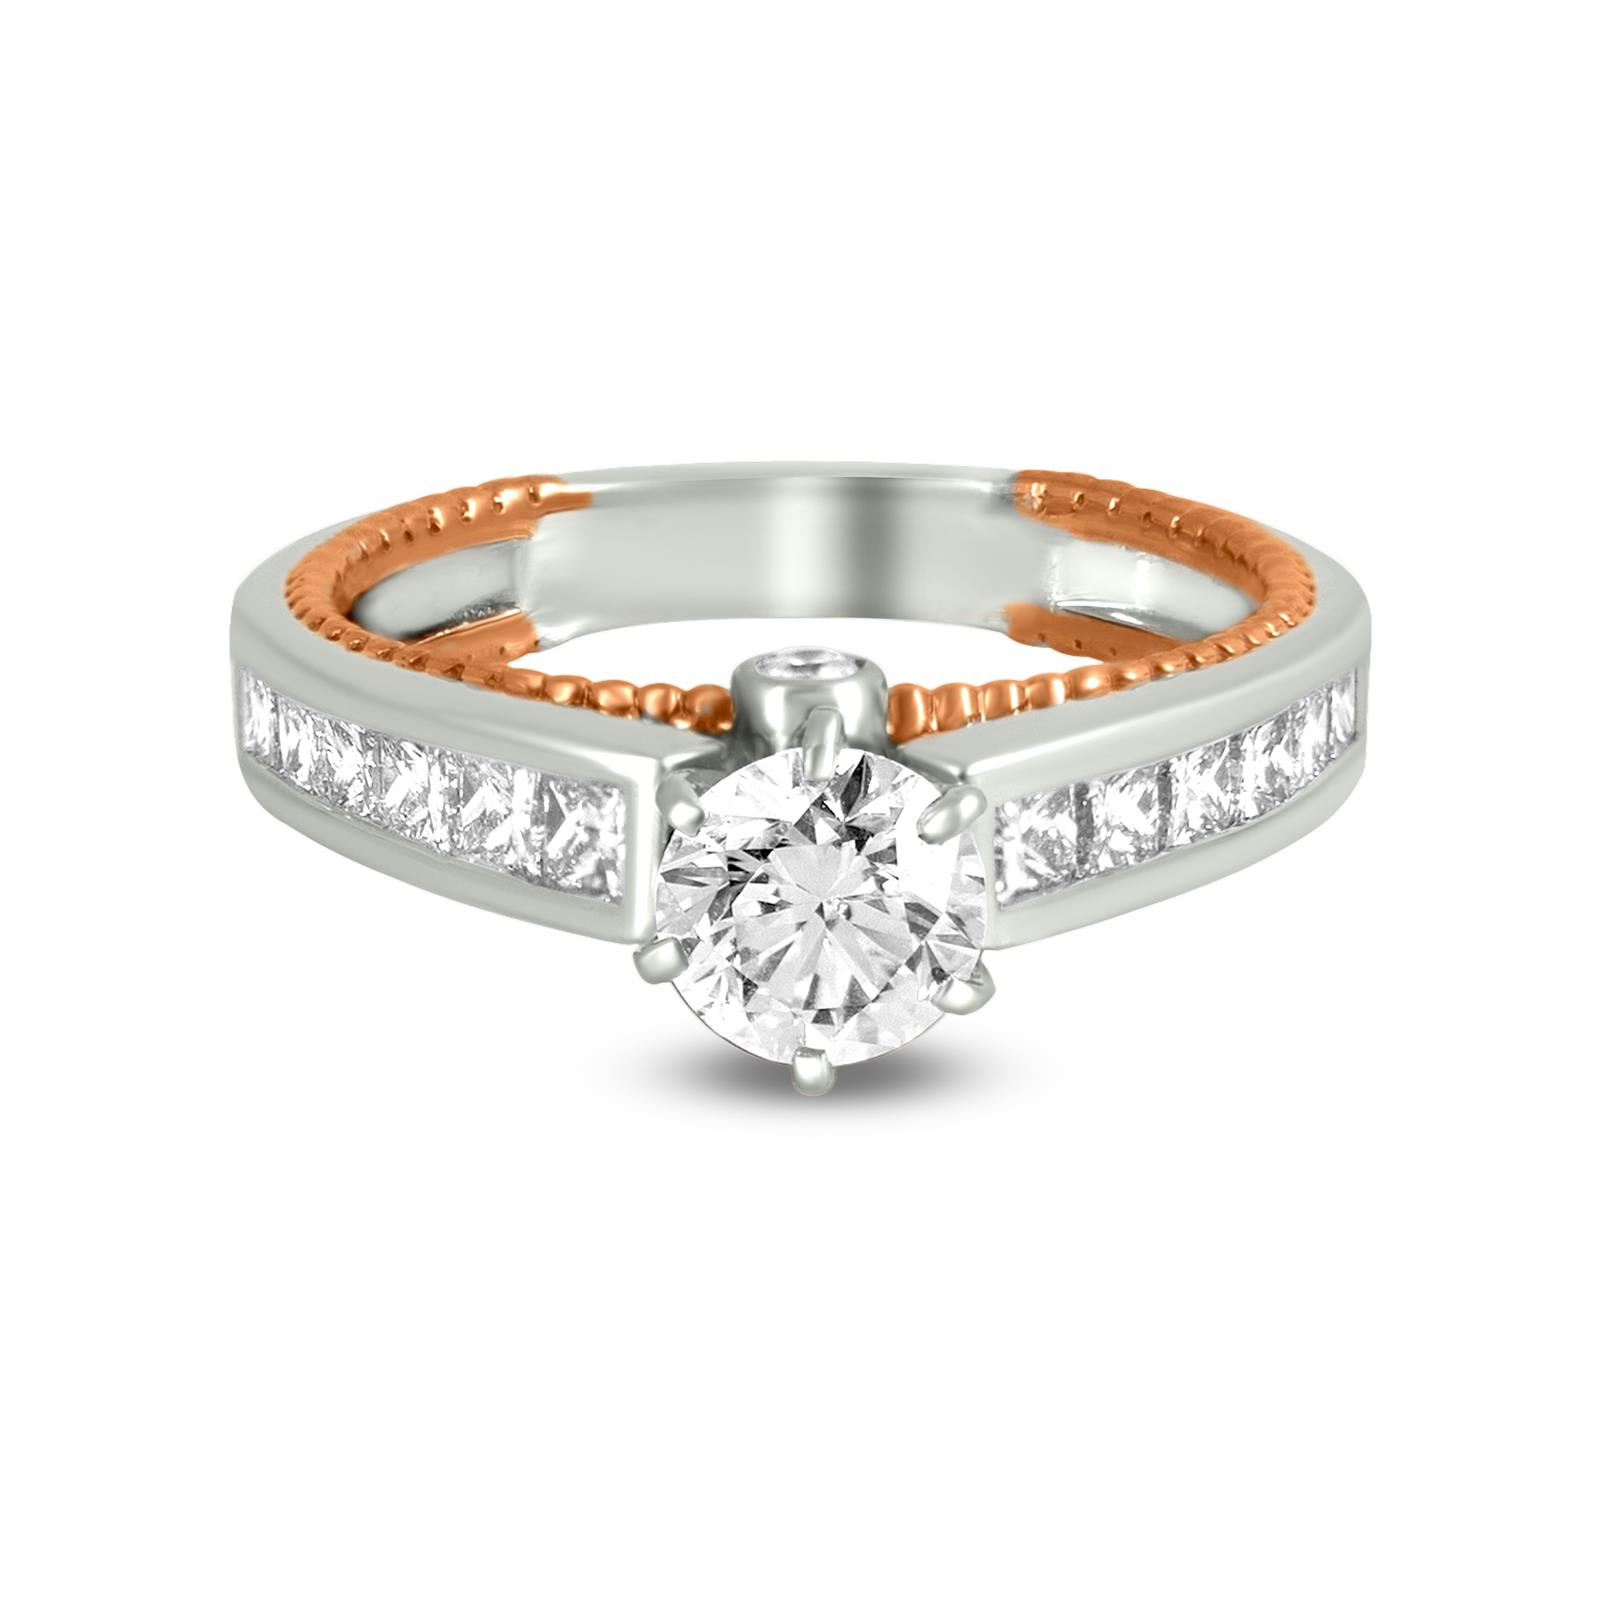 silver rings online, silver solitaire ring, engagement ring designs, buy  rings online, diamond ring designs, jewellery rings – CLARA